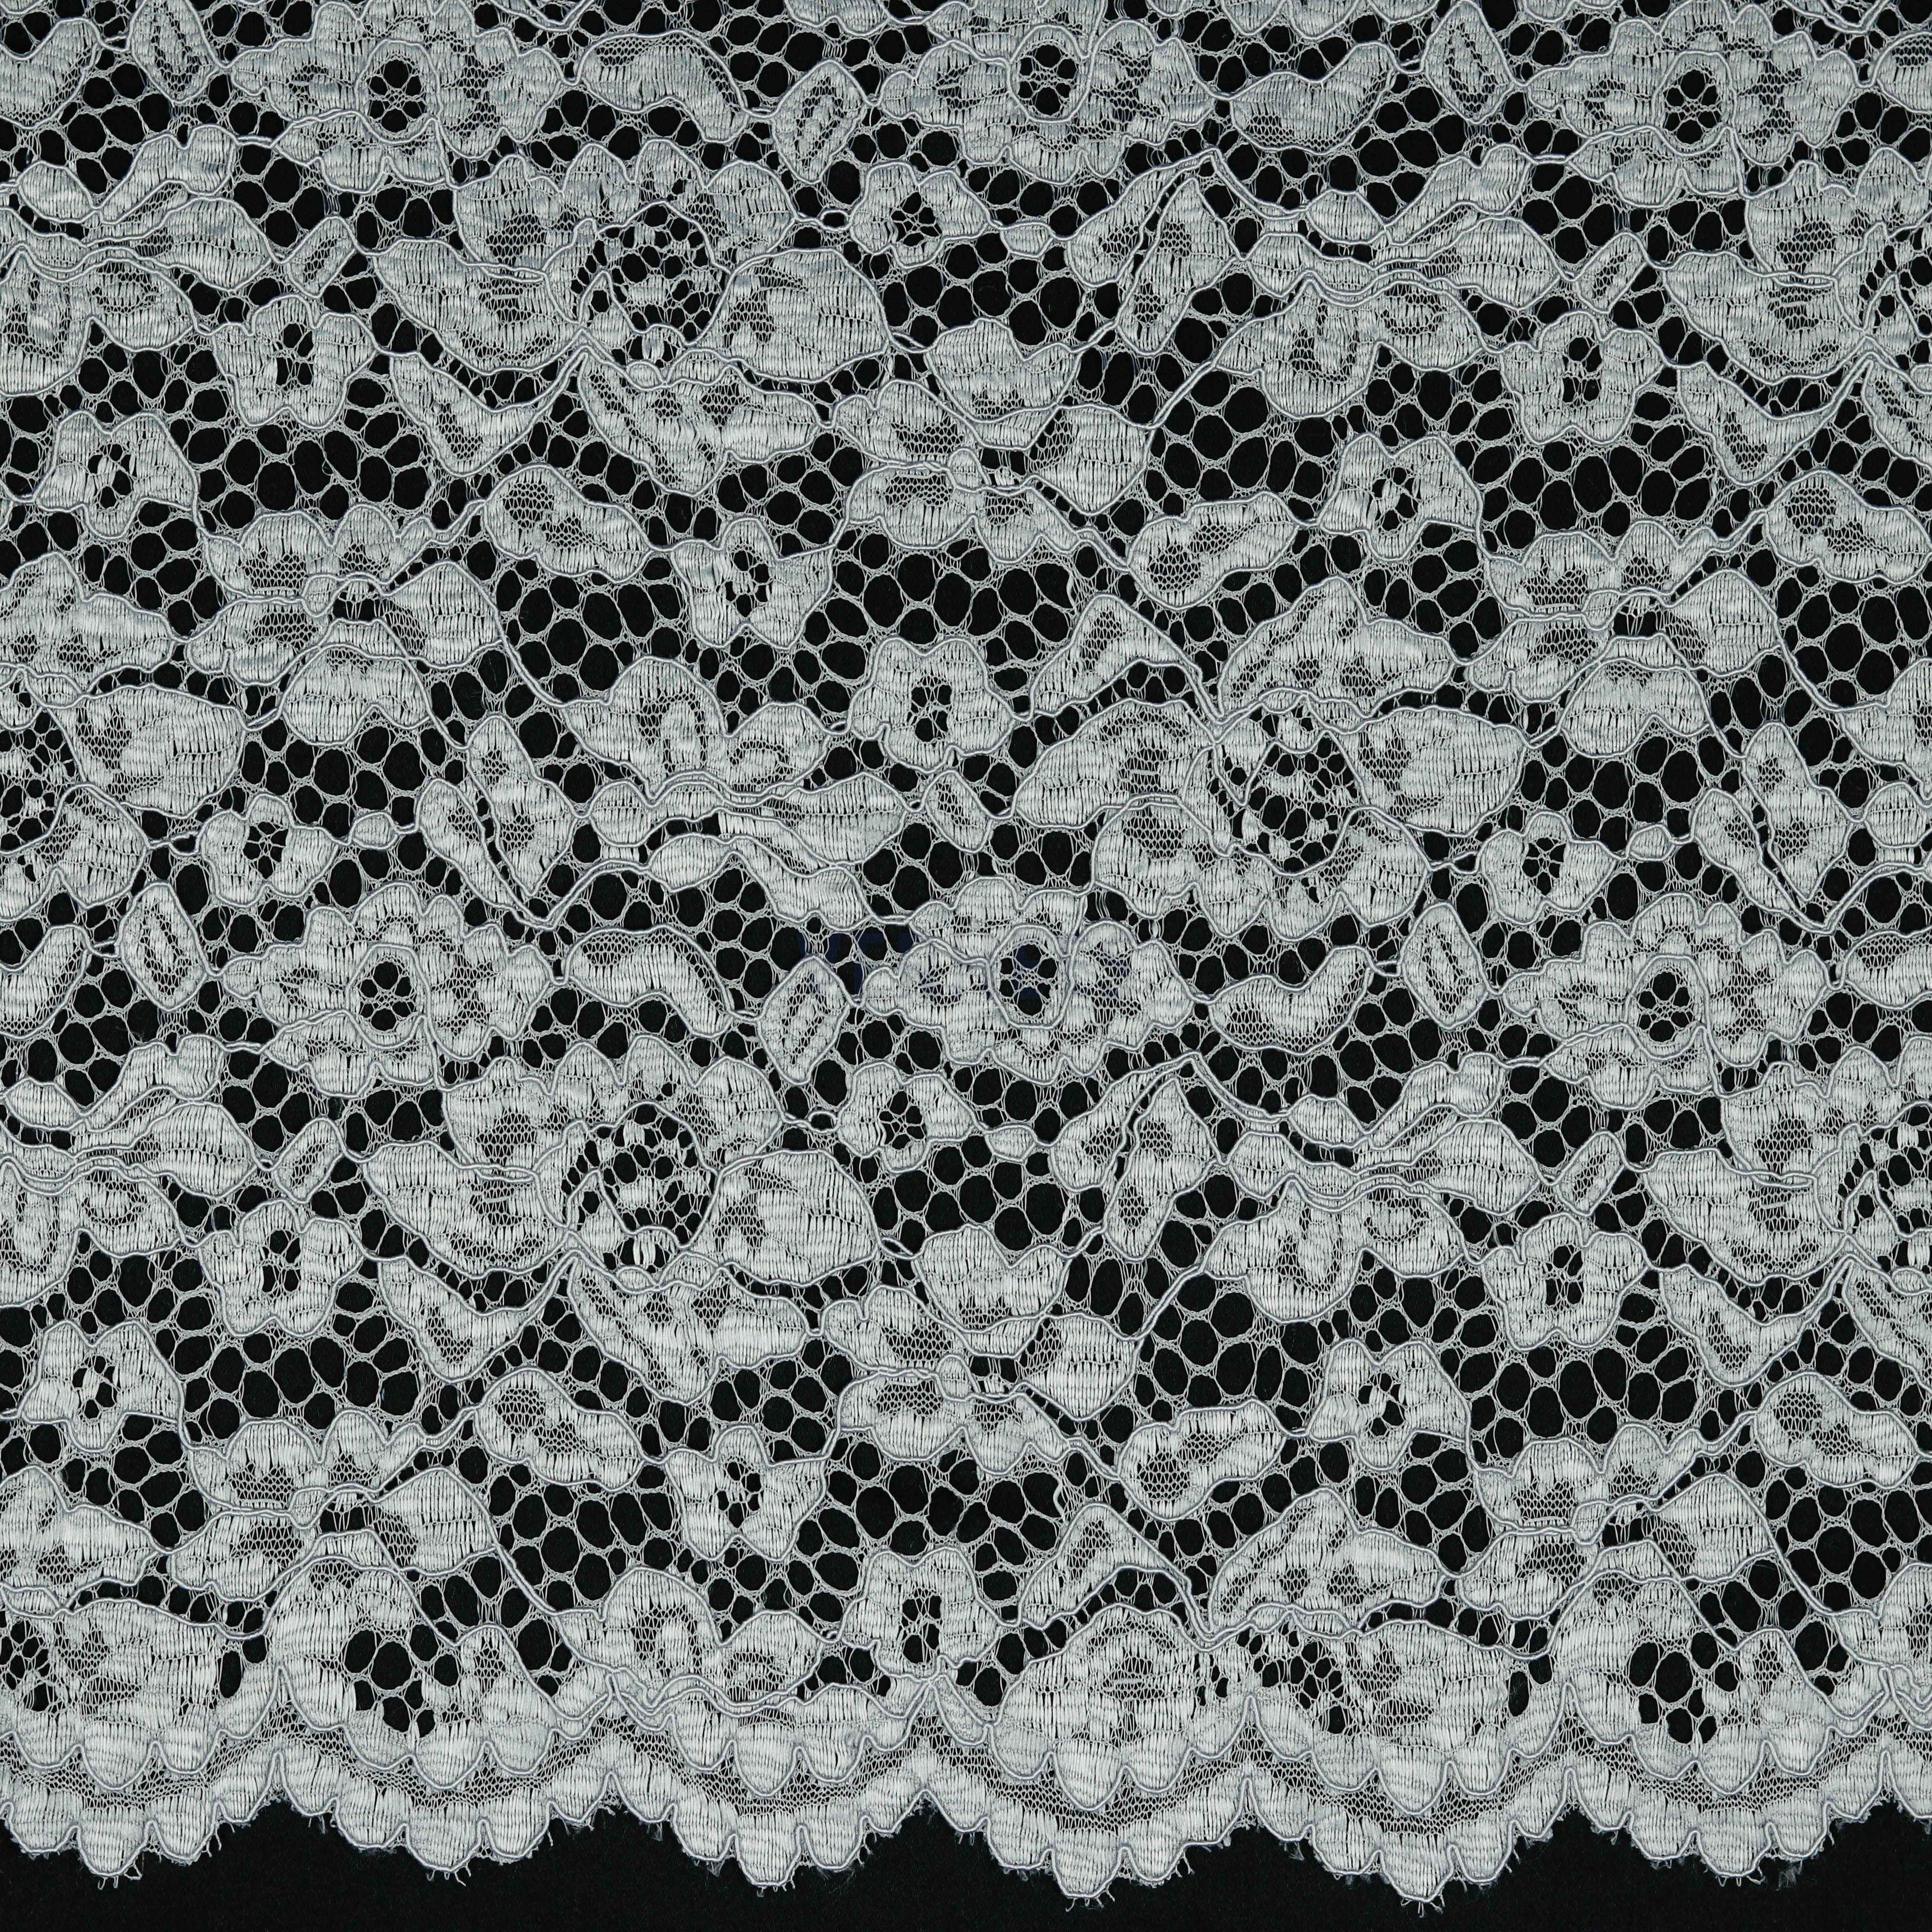 LACE BORDER 2 SIDES GREY (high resolution)